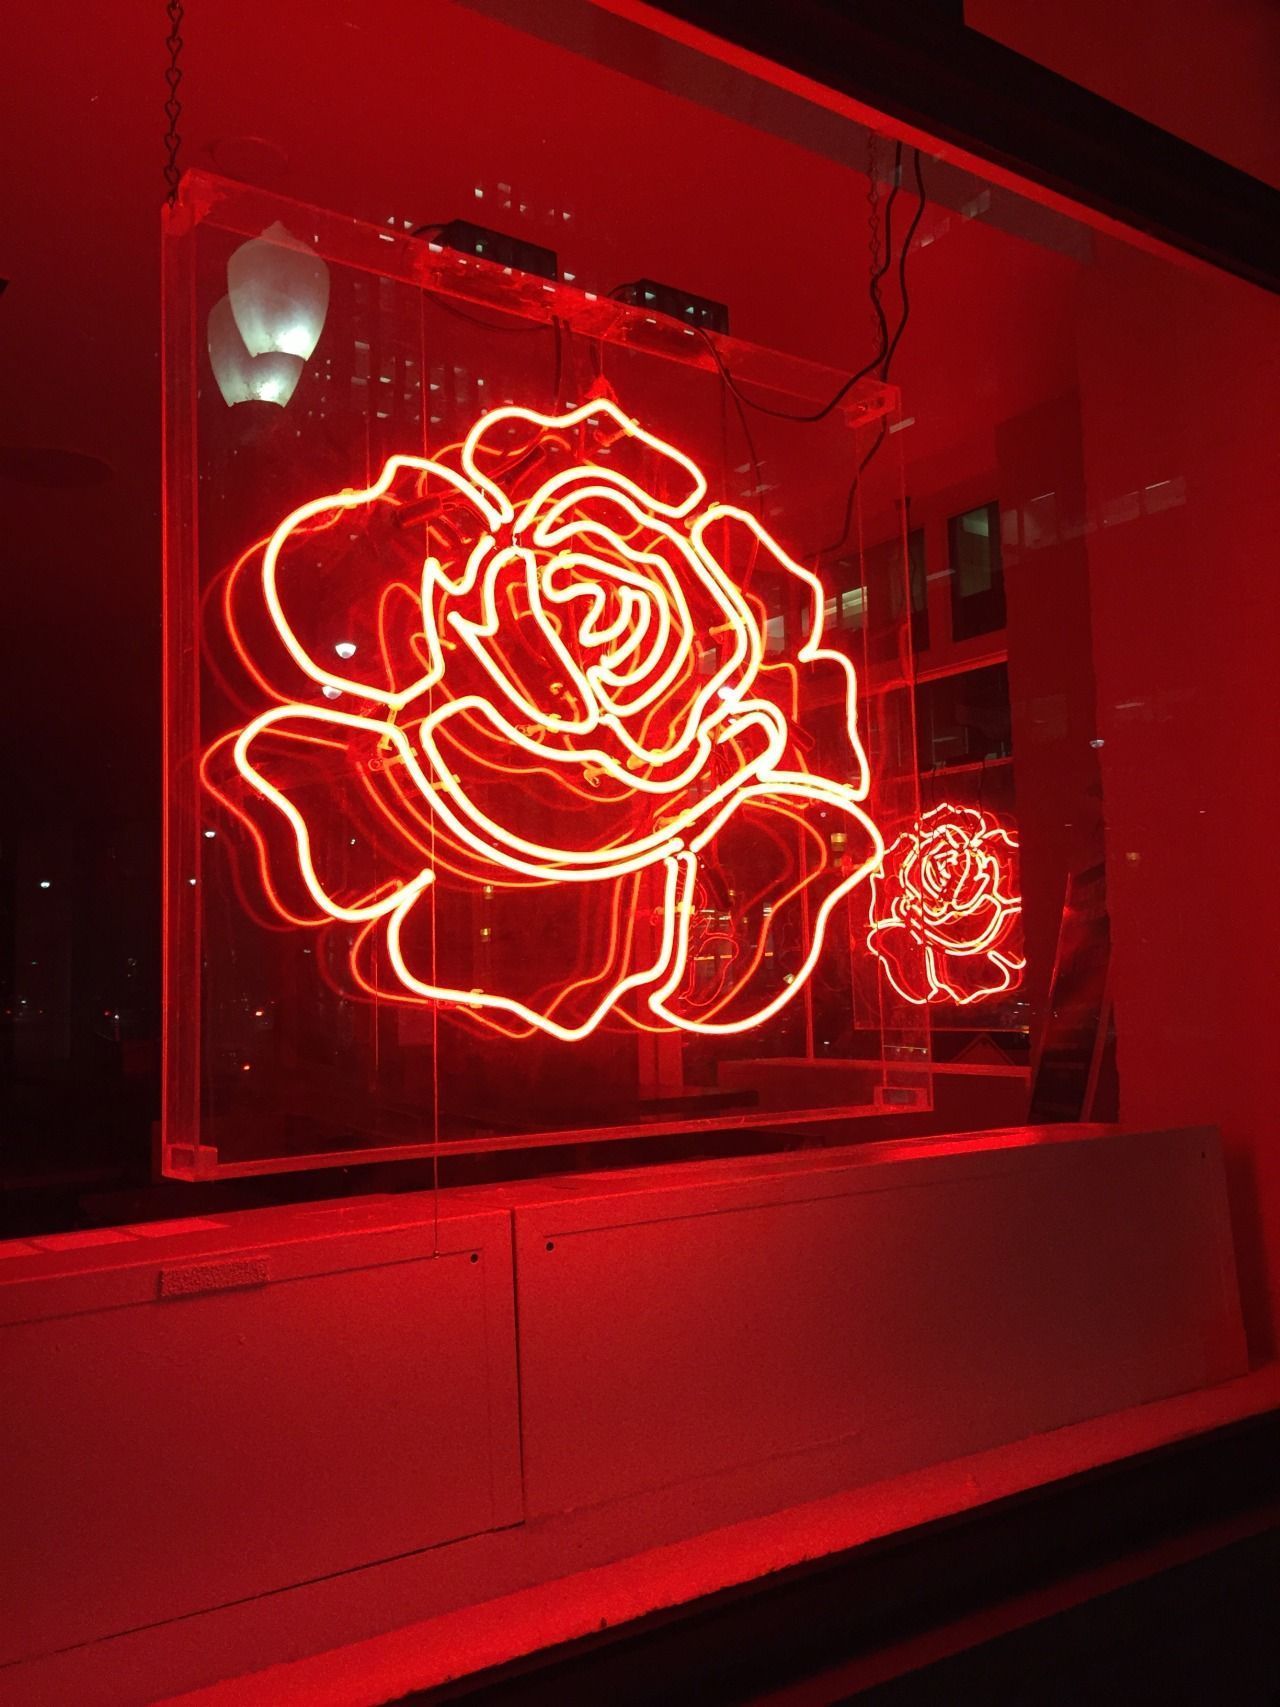 A red neon sign of a rose - Bright, red, neon red